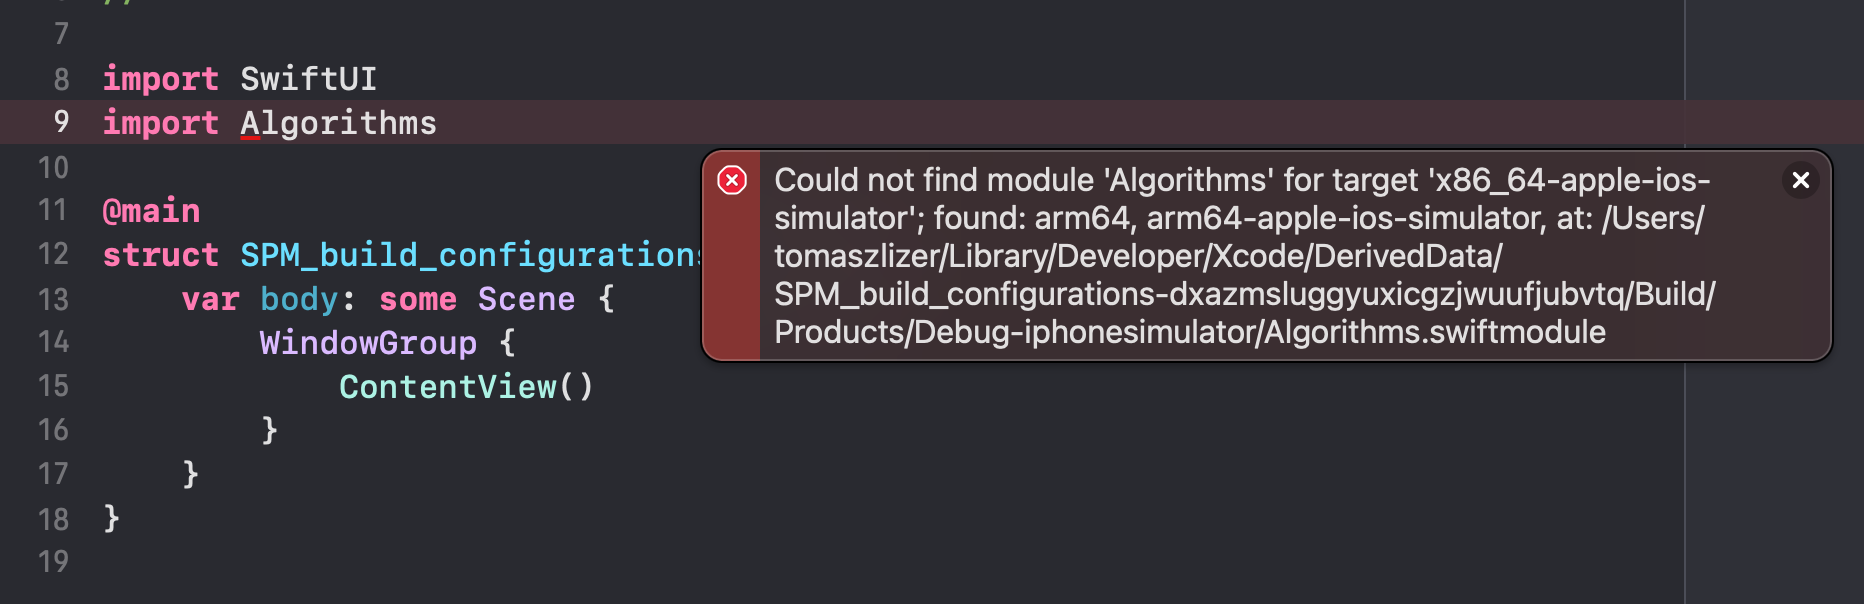 Could not find module <package name> for target 'x86_64-apple-ios-simulator'; found: arm64, arm64-apple-ios-simulator